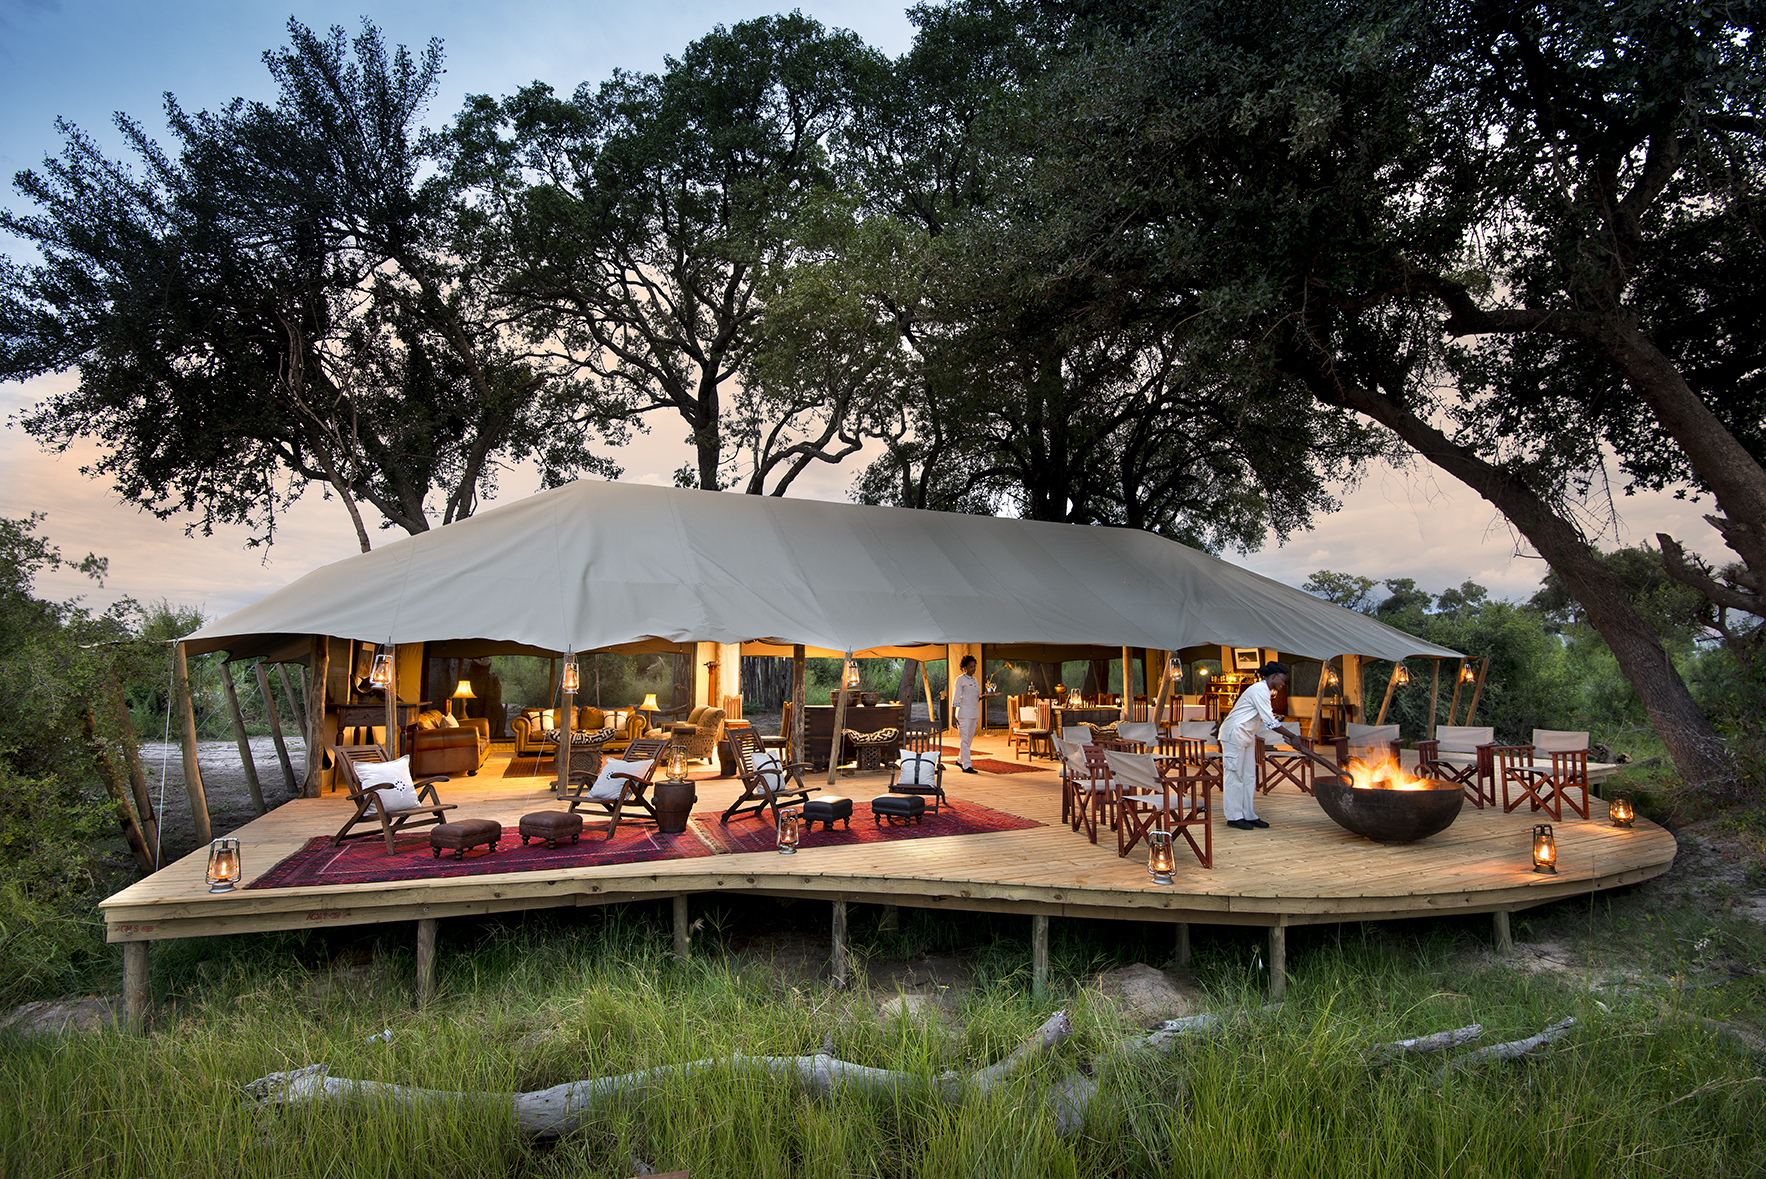 Outdoor living at the Duba Expedition Camp